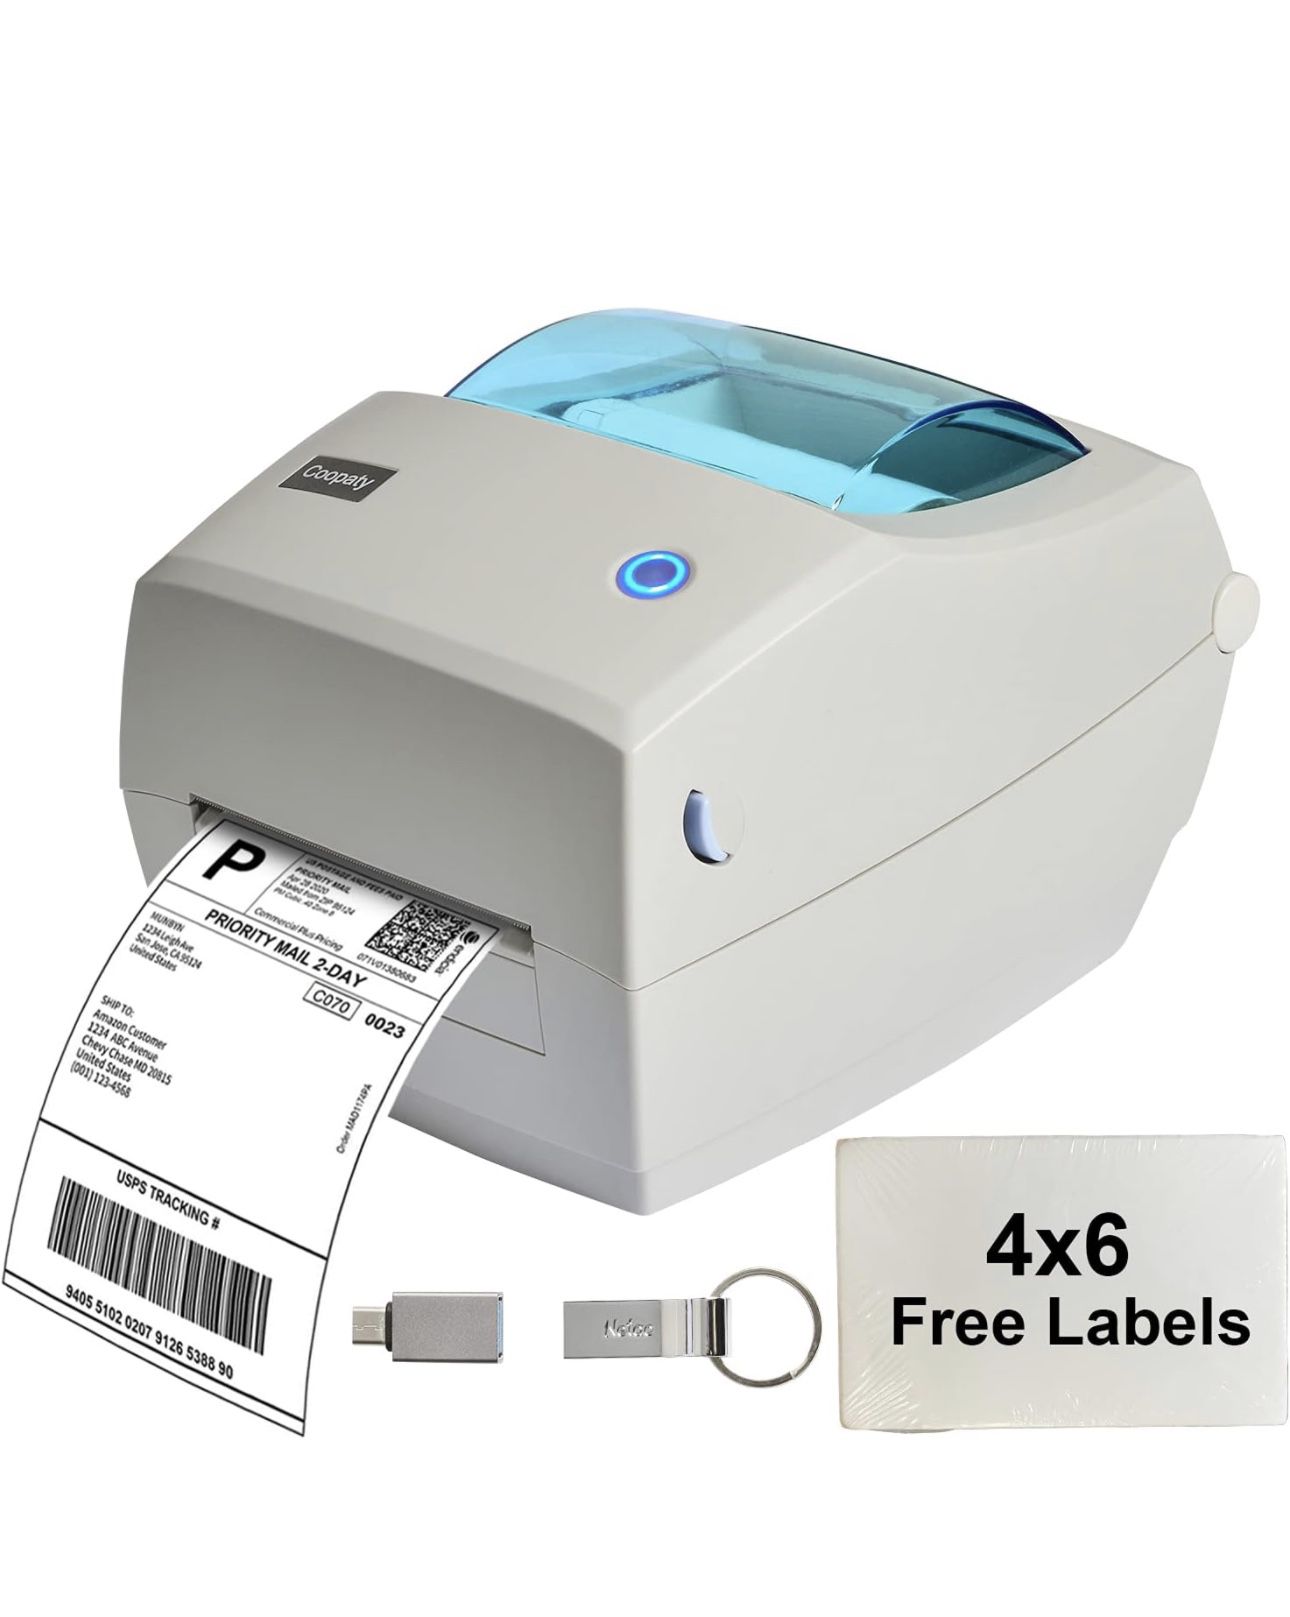 Coopaty Label Printer 